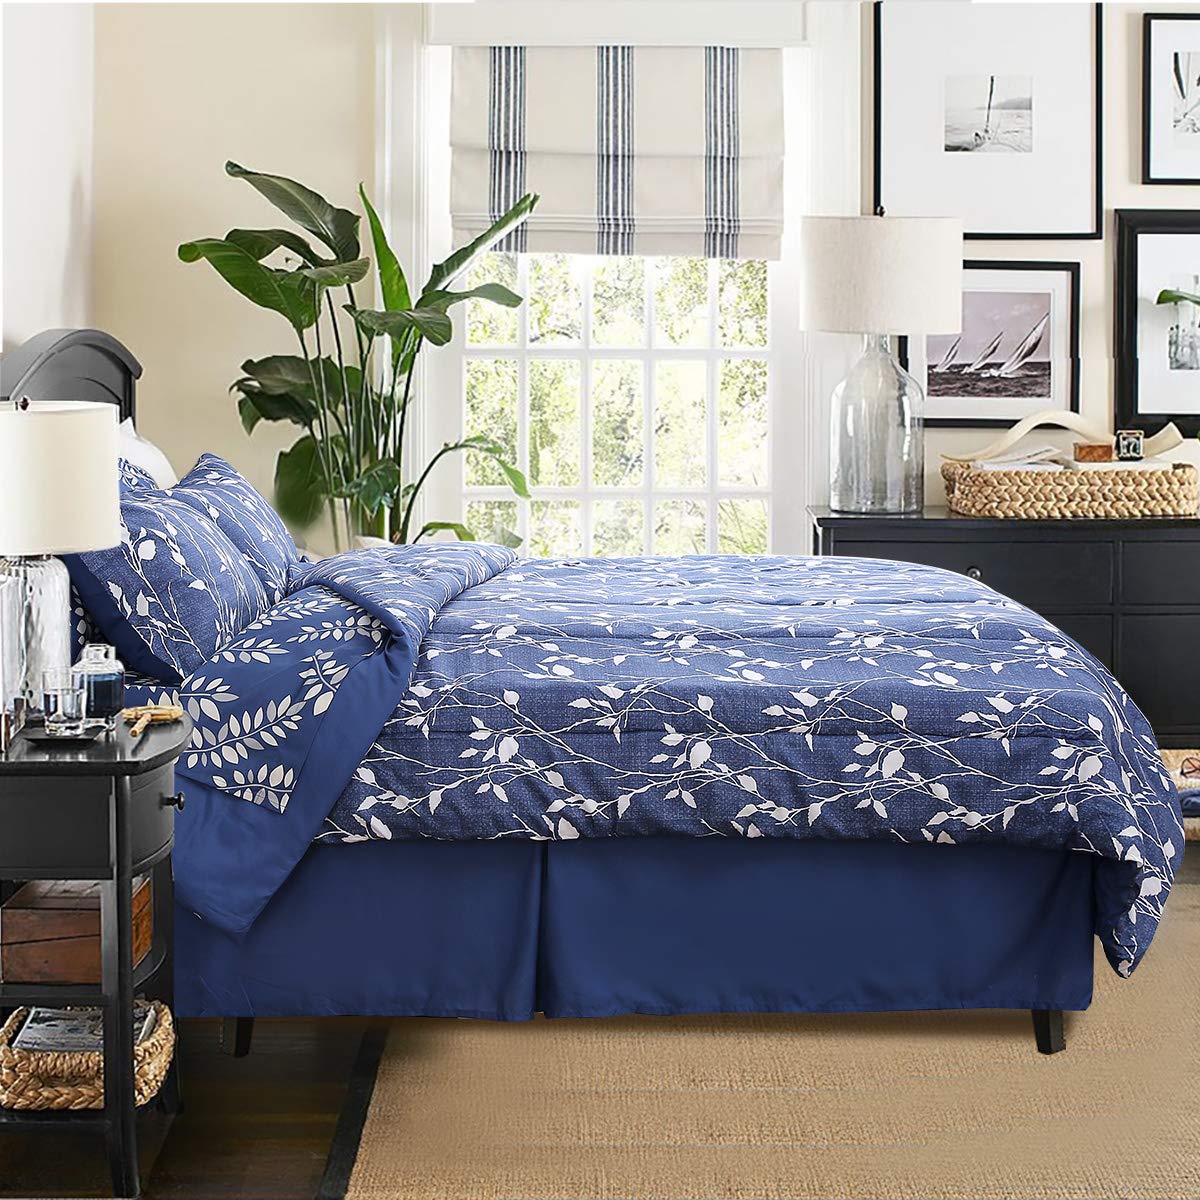 HONEYMOON - 6PC Comforter Set for Bedroom Guest Room - Twin, Blue with White Leaves